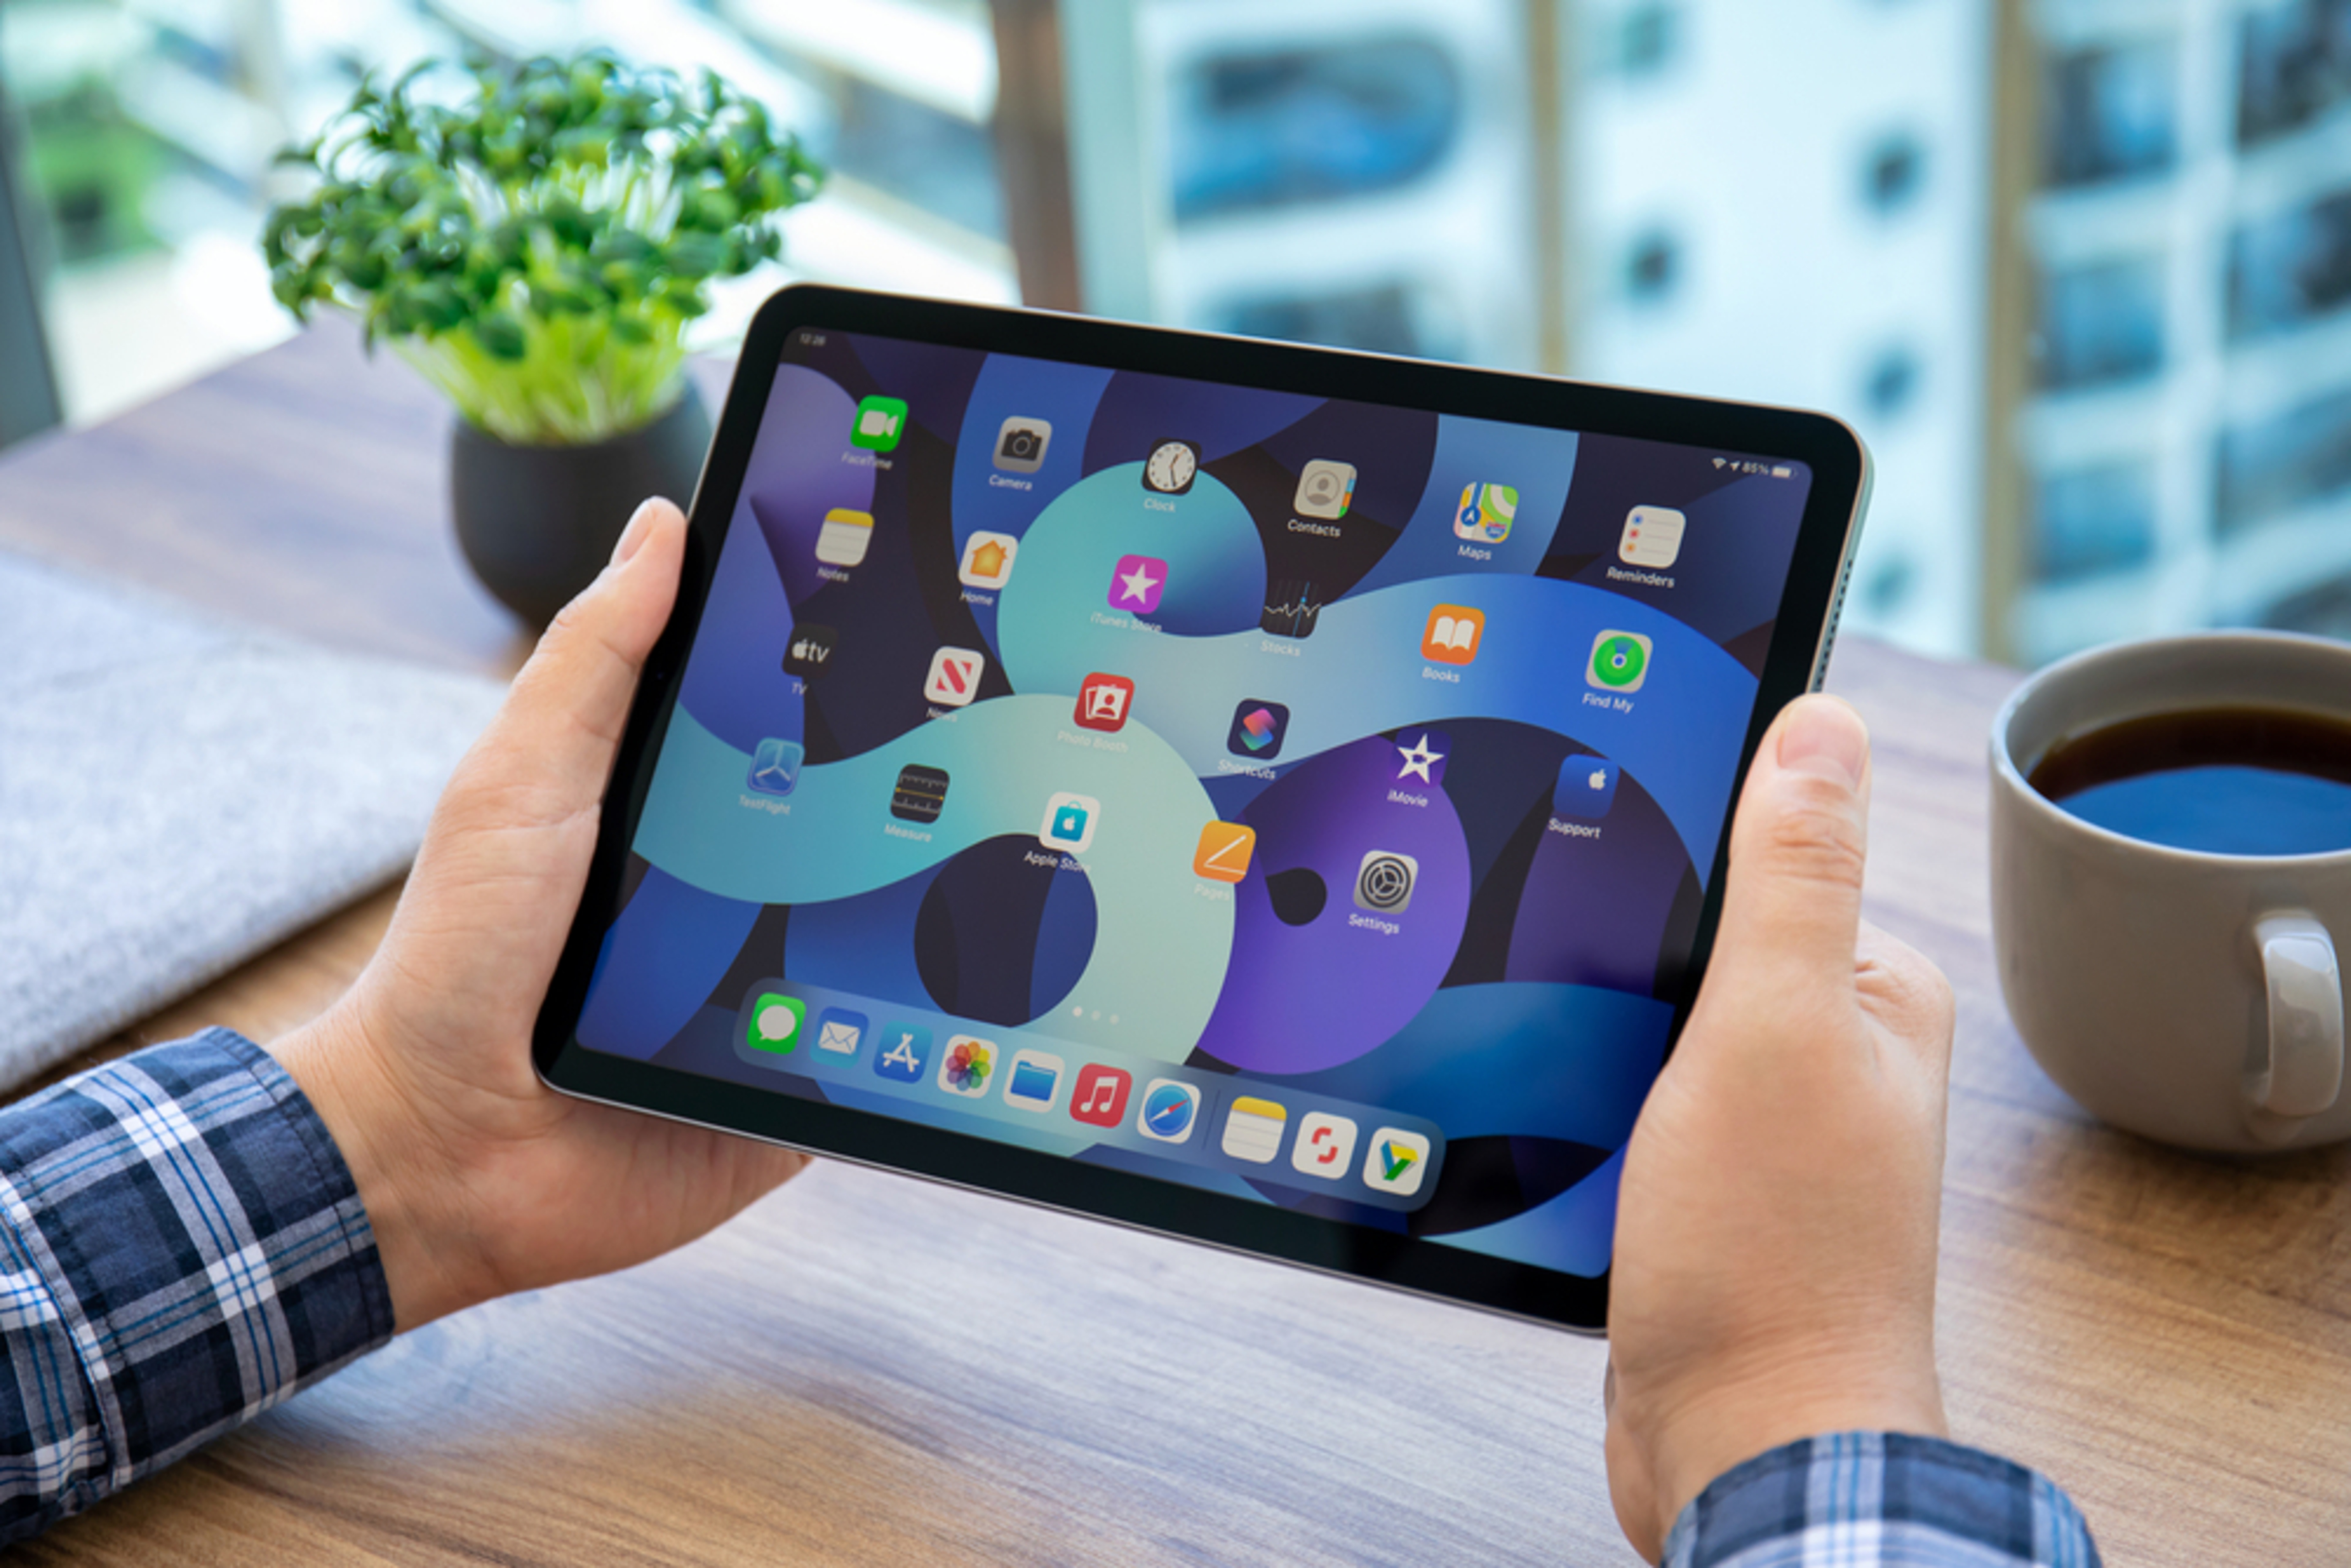 &#39;You Get An iPad And You Get An iPad!&#39; Coforge Celebrates Oprah-Style As It Crosses $1B In Annual Revenue